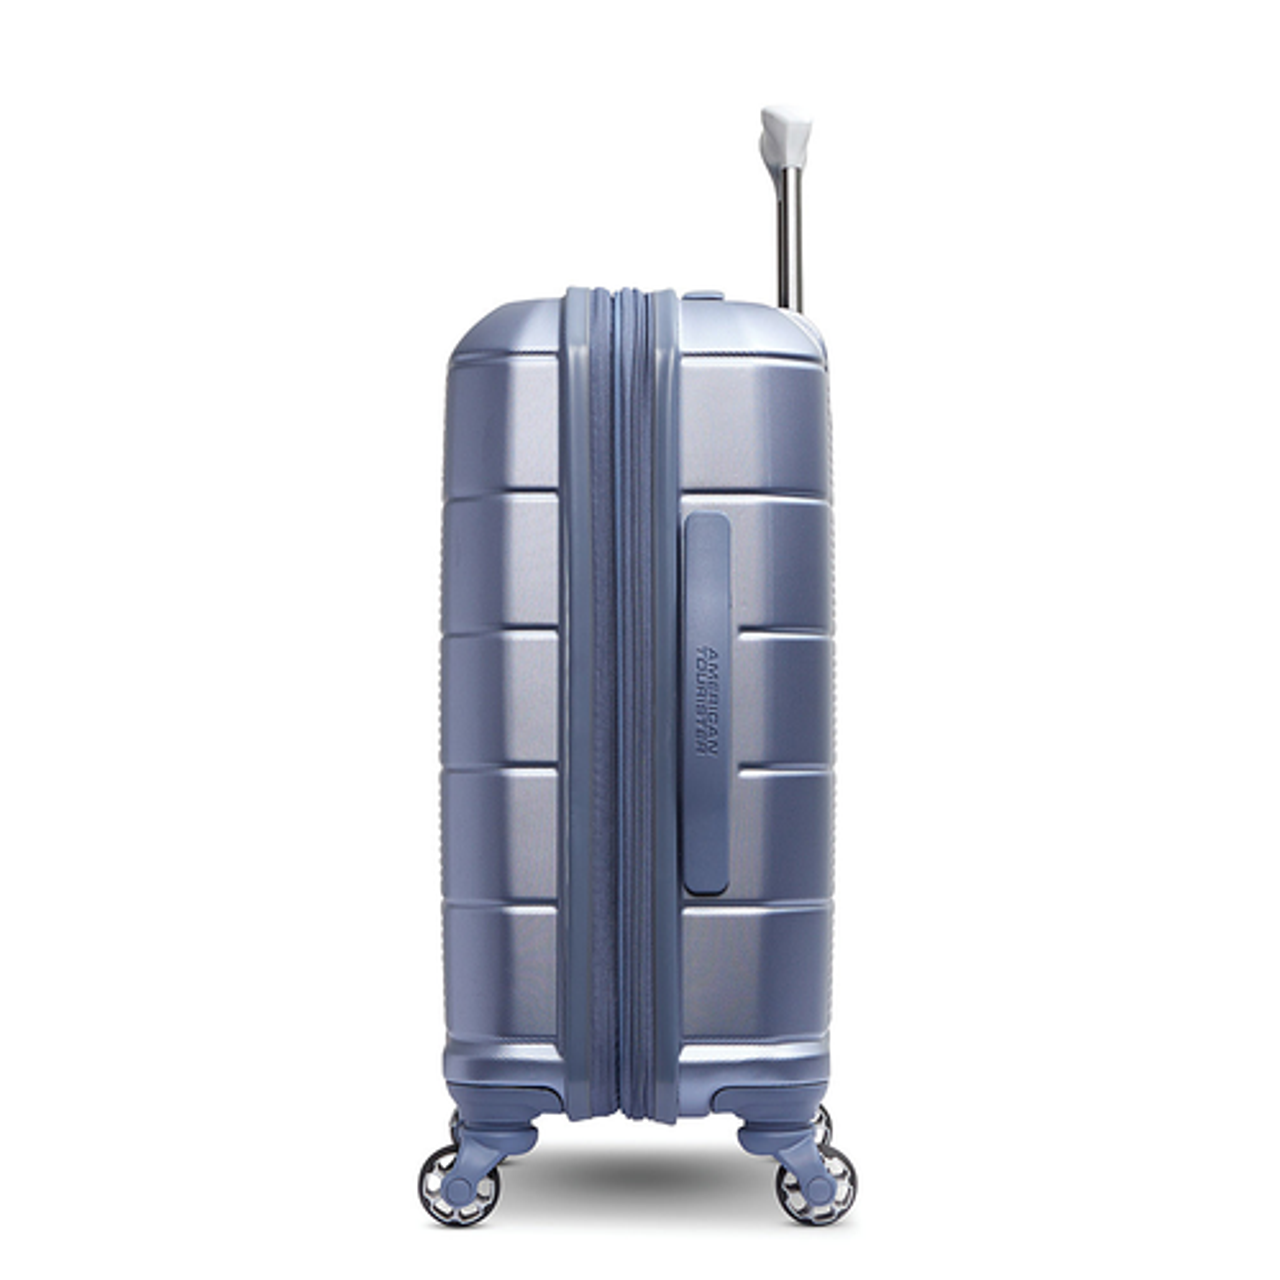 American Tourister - Stratum 2.0 20" Spinner Suitcase - Slate Blue